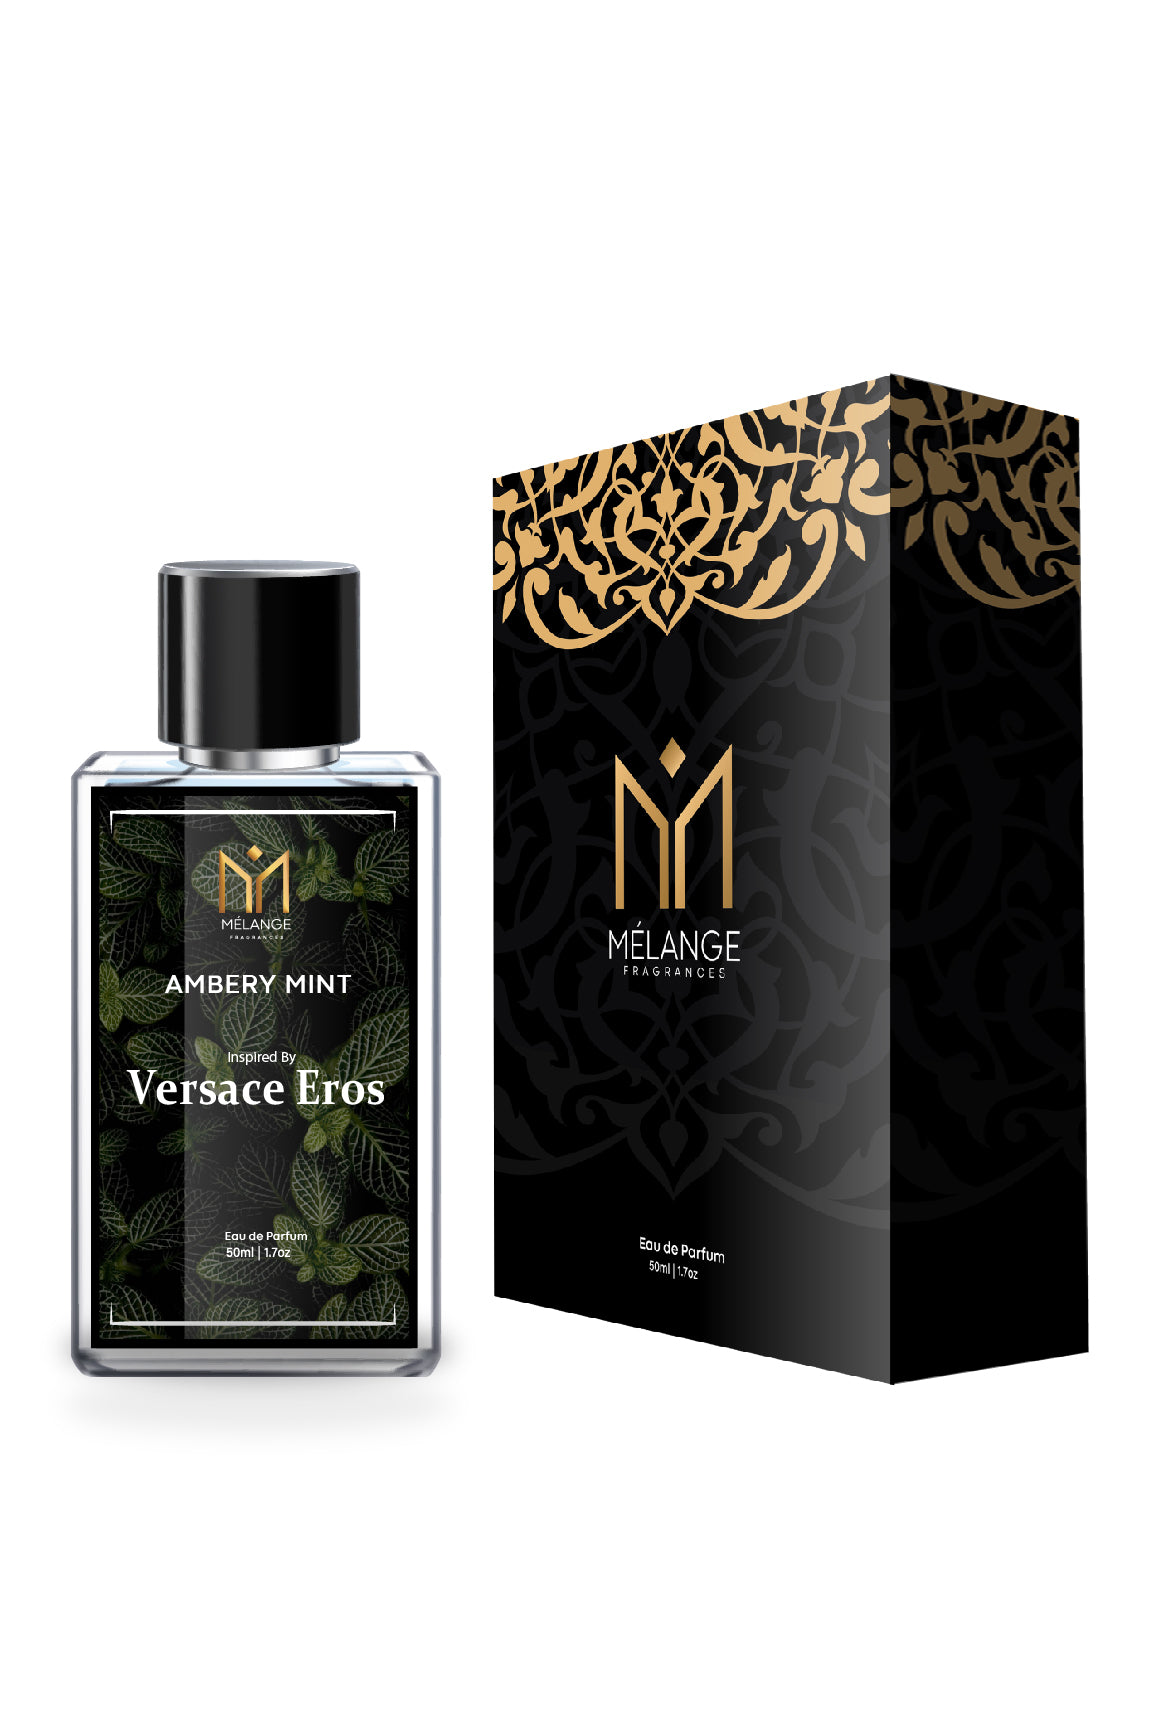 AMBERY MINT- Inspired By Versace Eros